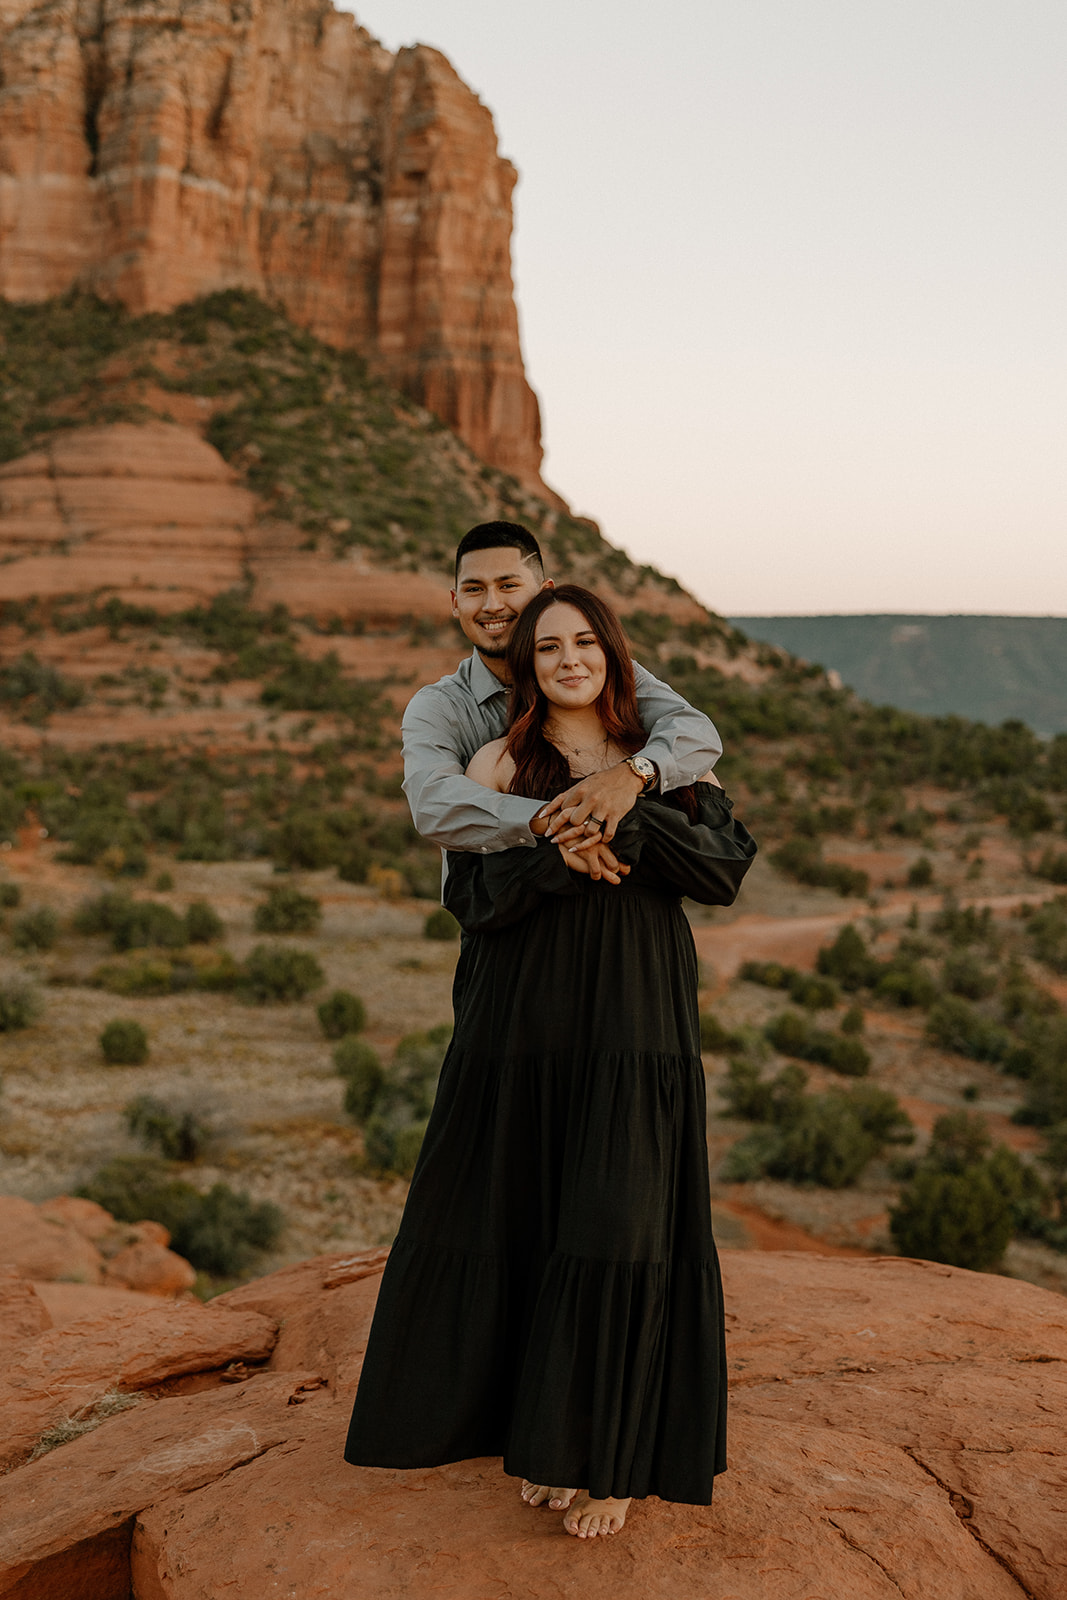 Stunning couple share a hug with the beautiful Arizona nature in the backdrop